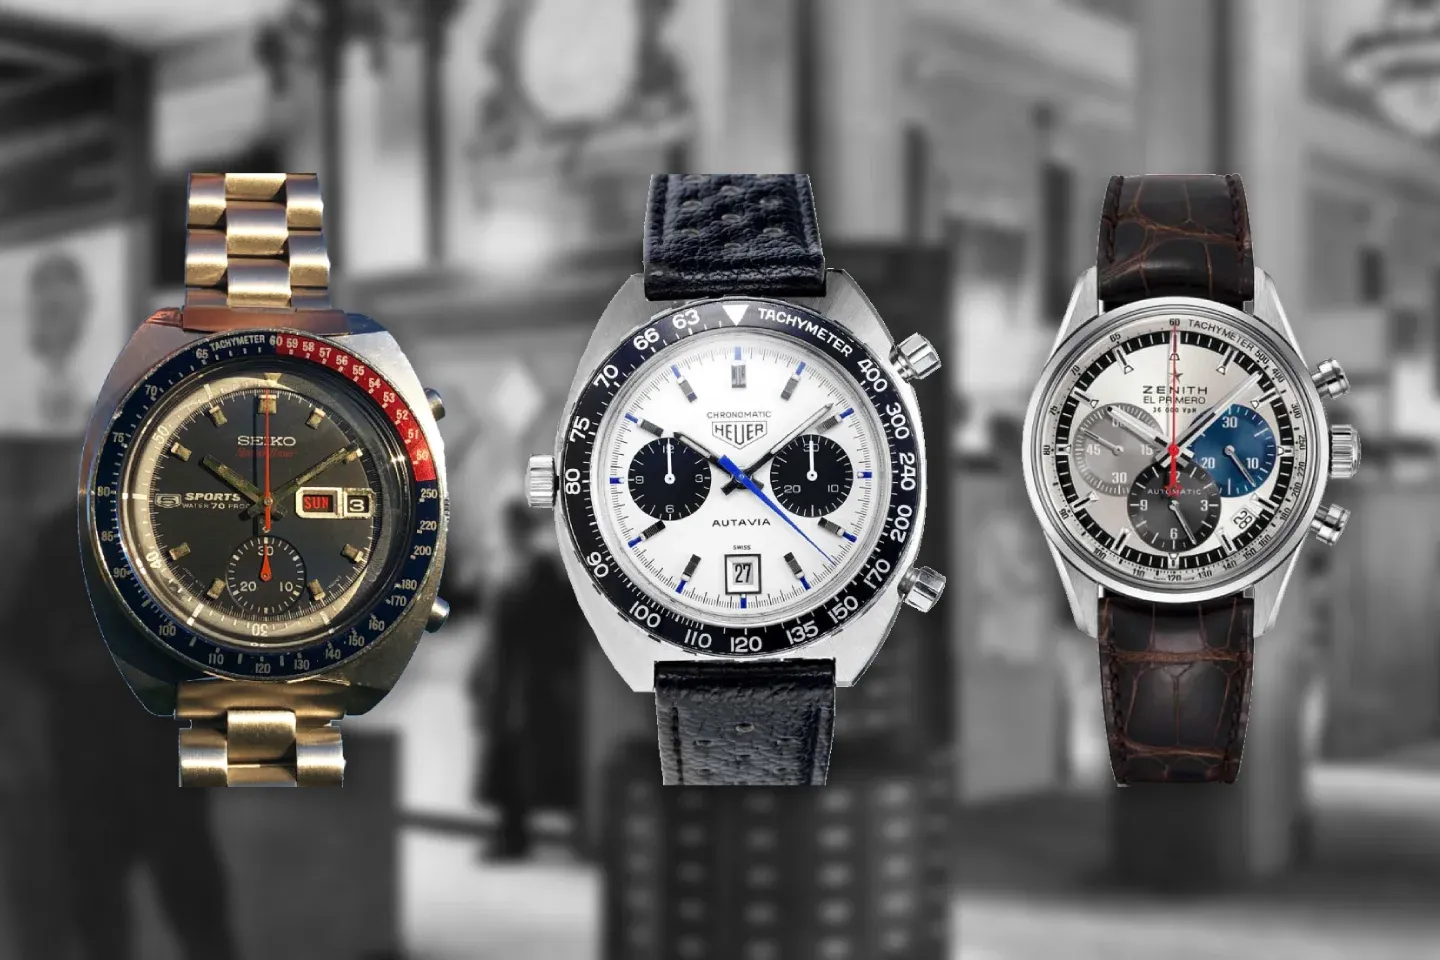 Three contenders participated in the race to develop the world's first automatic chronograph: Seiko, operating independently in Japan, Zenith and a collaborative effort among Swiss brands Heuer, Breitling and Hamilton-Buren